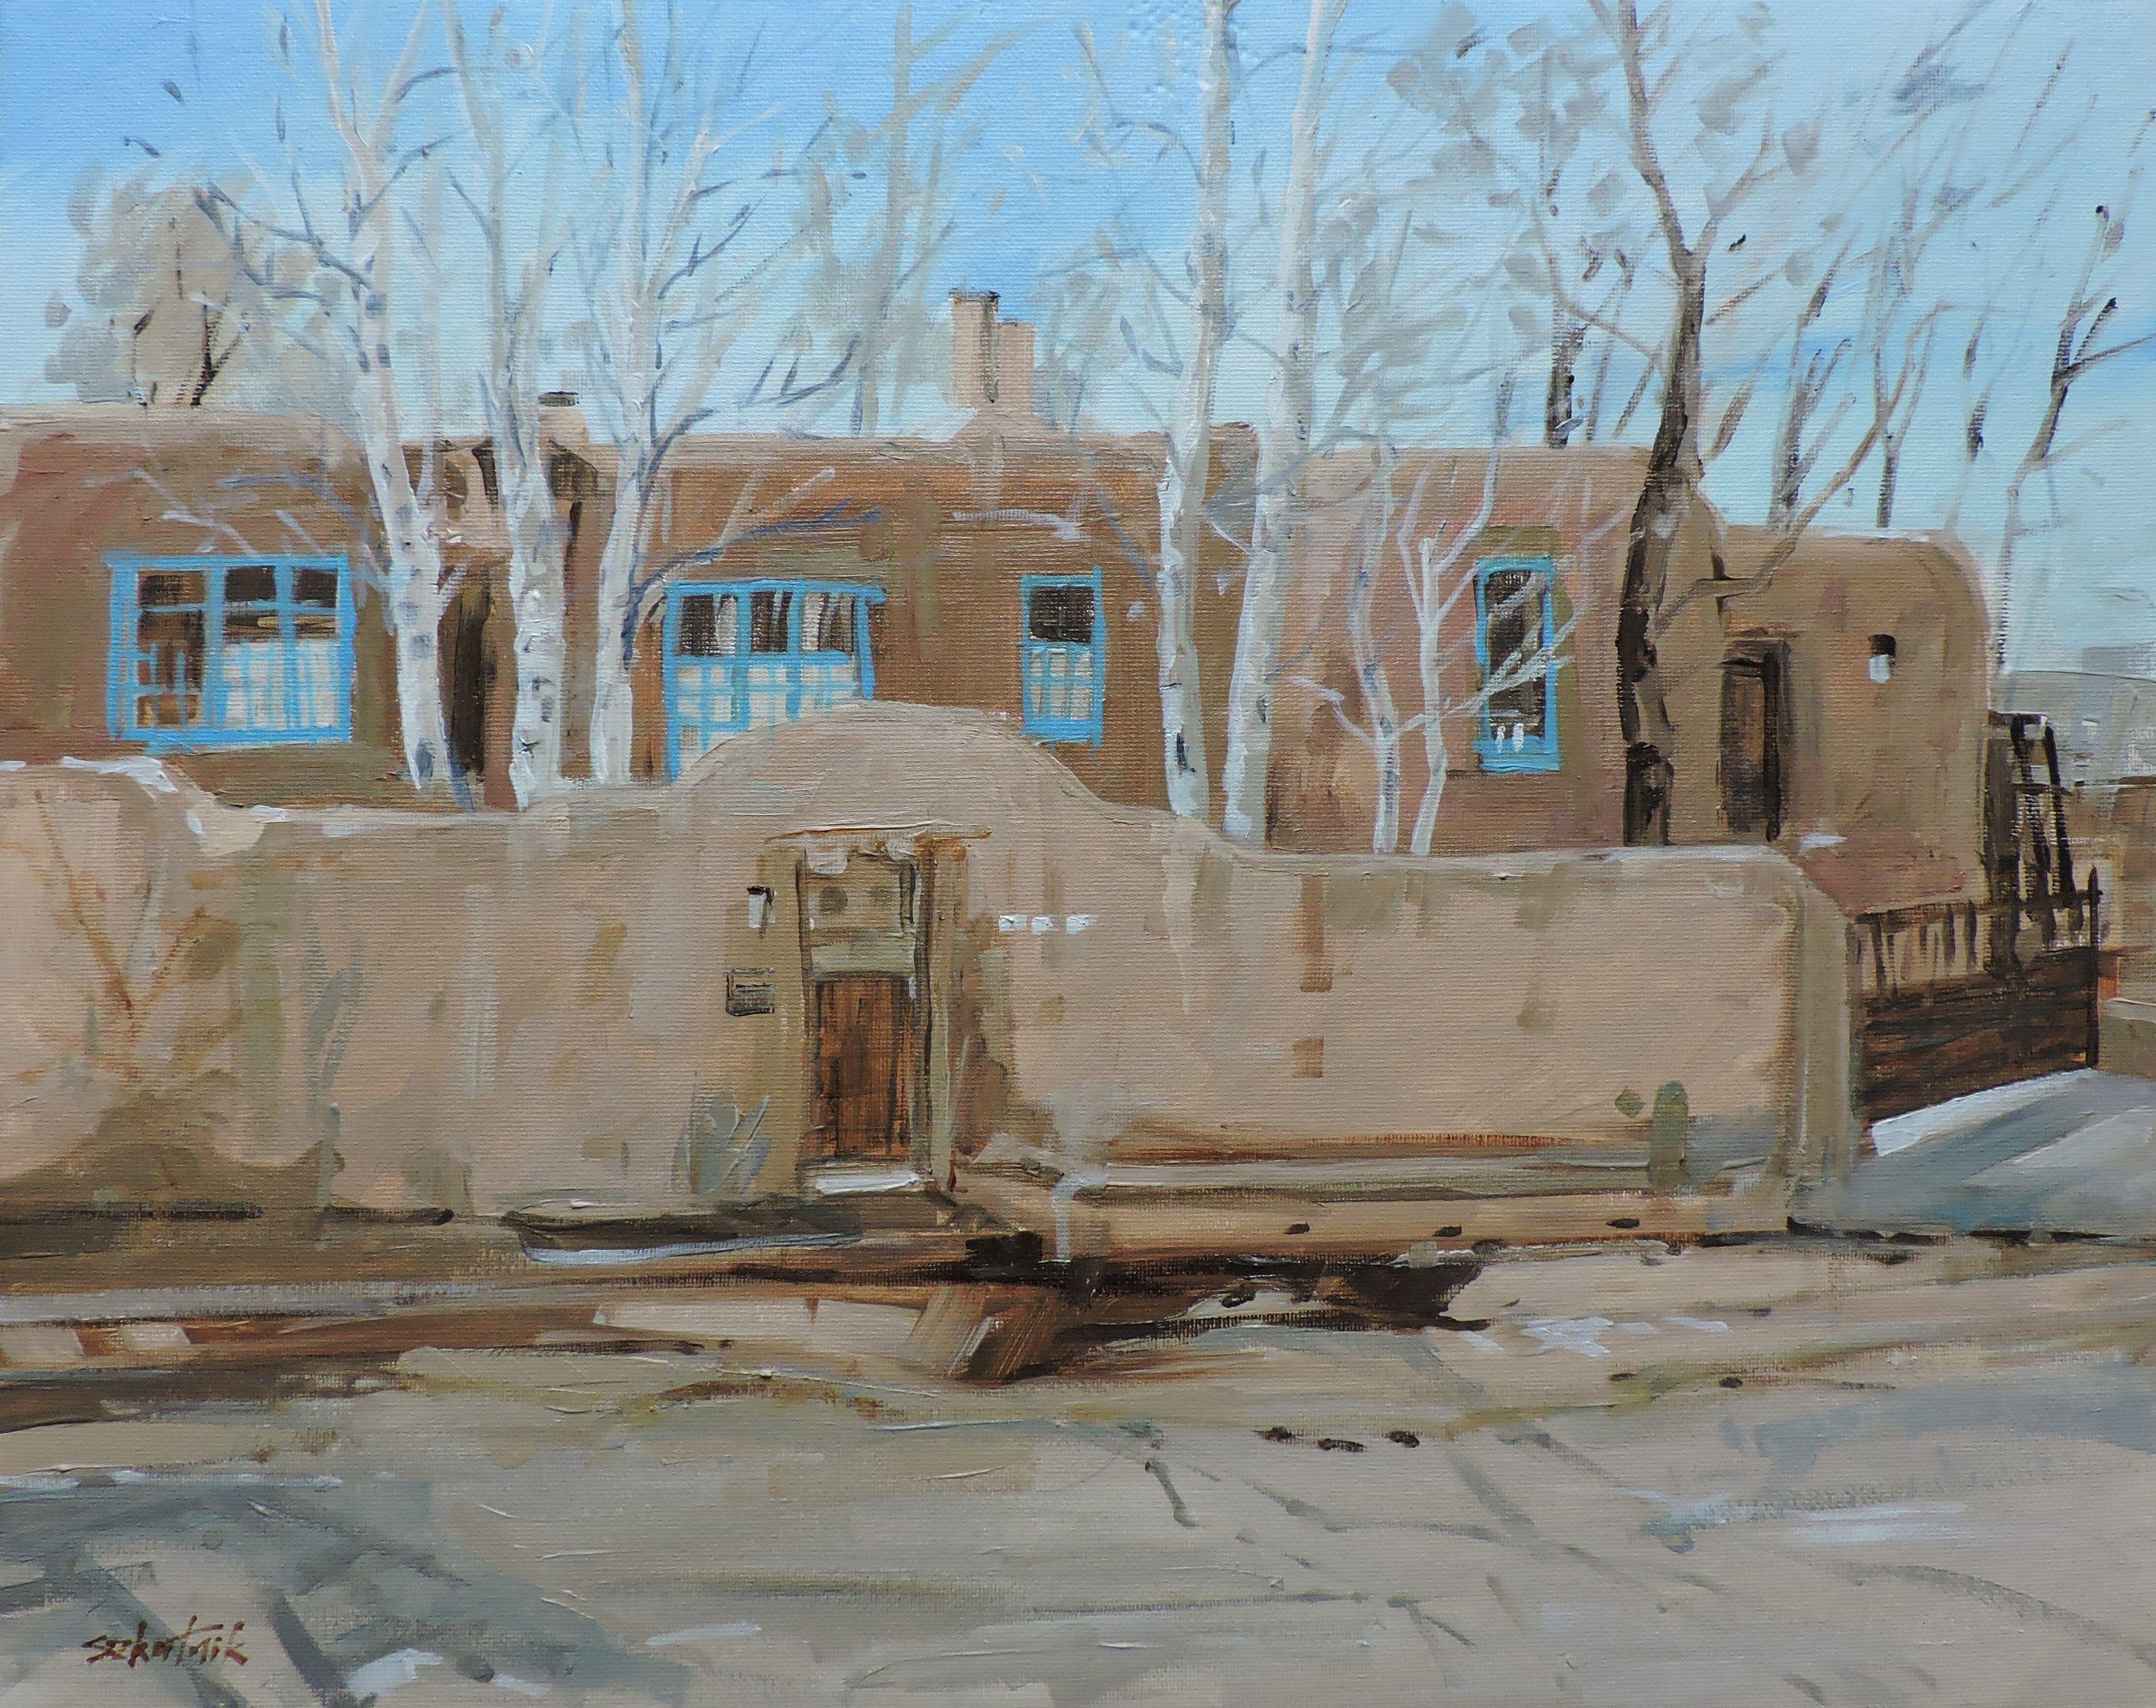 Original en plein air oil on panel paint in Santa Fe New Mexico  Gallery Value $ 1450.00 :: Painting :: Impressionist :: This piece comes with an official certificate of authenticity signed by the artist :: Ready to Hang: No :: Signed: Yes ::